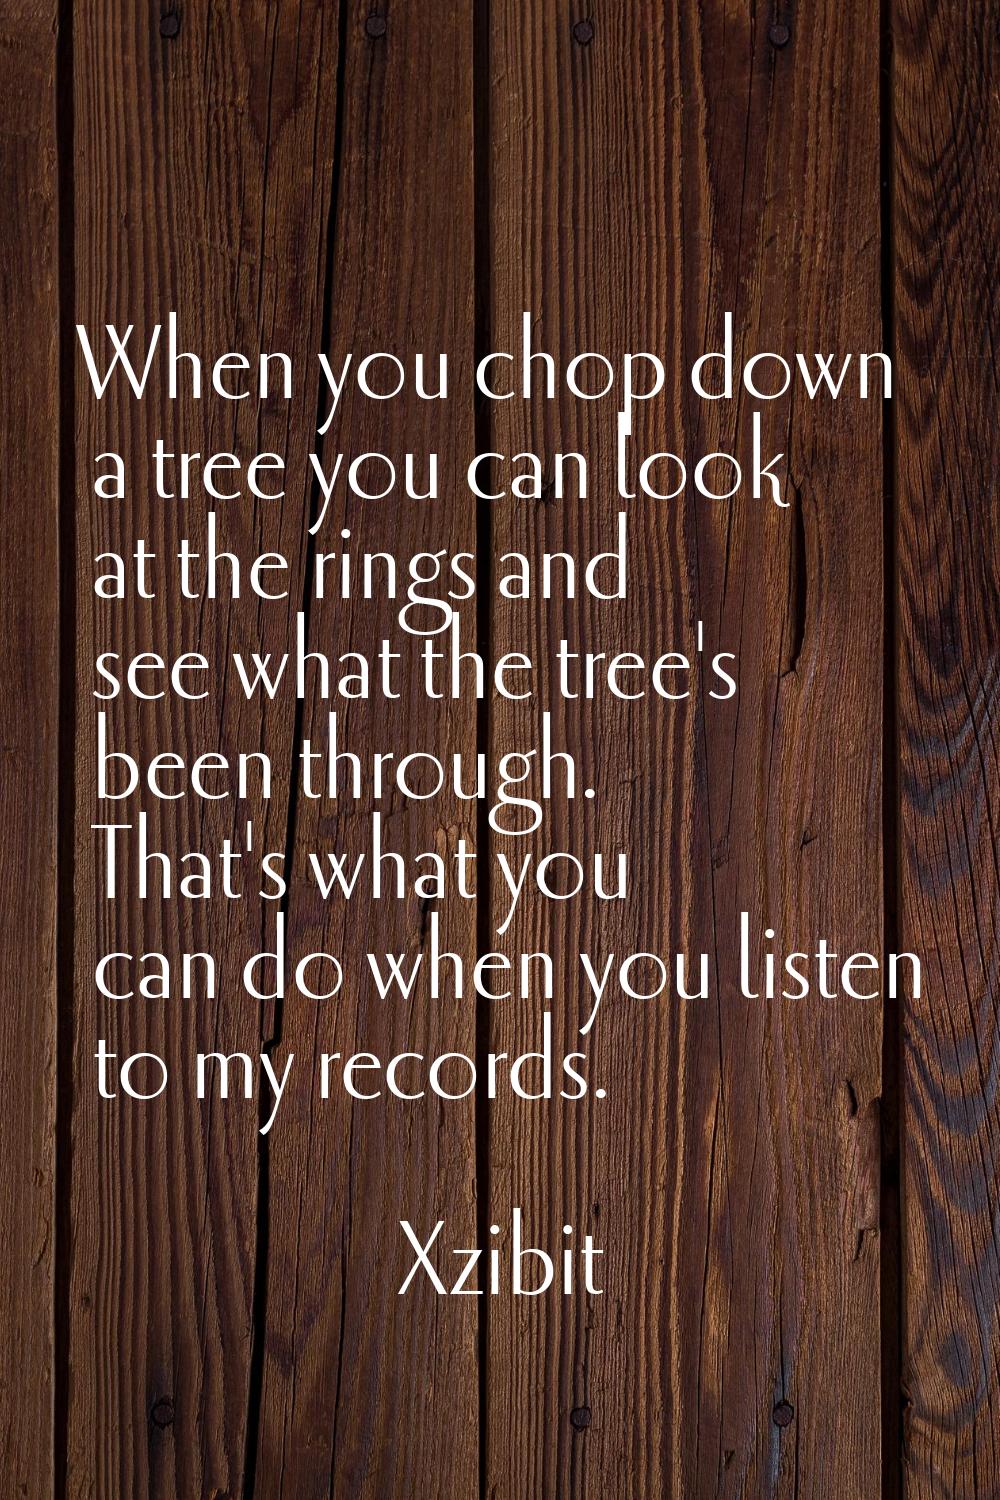 When you chop down a tree you can look at the rings and see what the tree's been through. That's wh